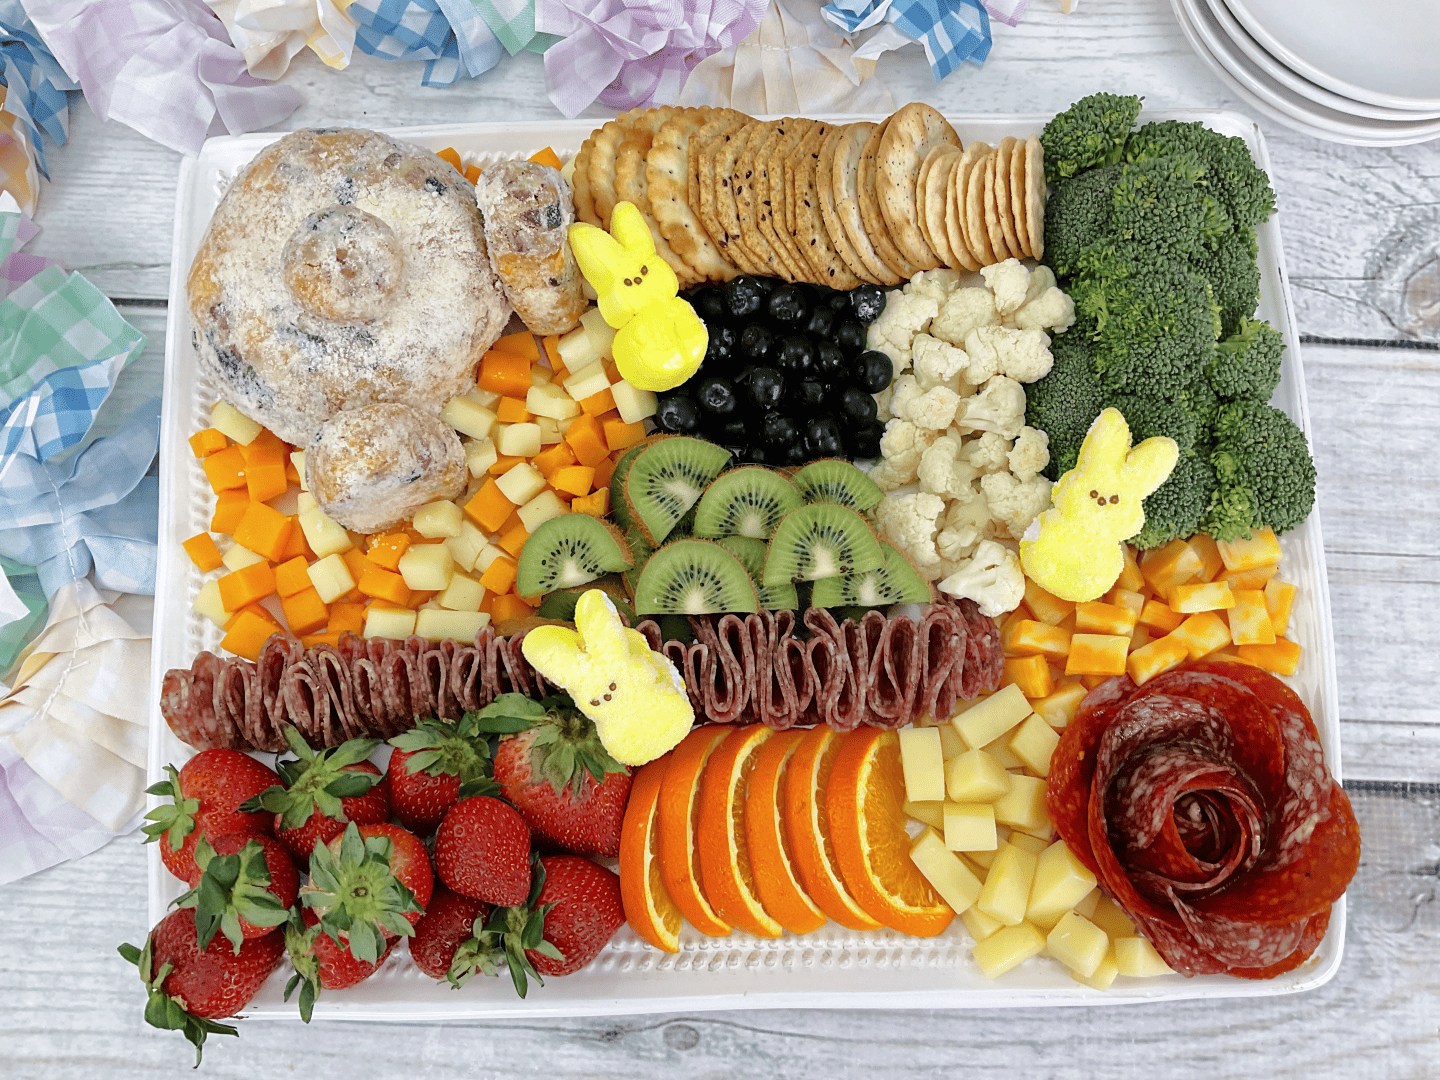 Bunny Butt Cheeseball  & Charcuterie Board: bunny cheese ball, 4 types of crackers, 4 types of cheese, various meats, oranges, strawberries, marshmallow peeps, kiwi, blueberries, cauliflower, broccoli, and pineapple. 